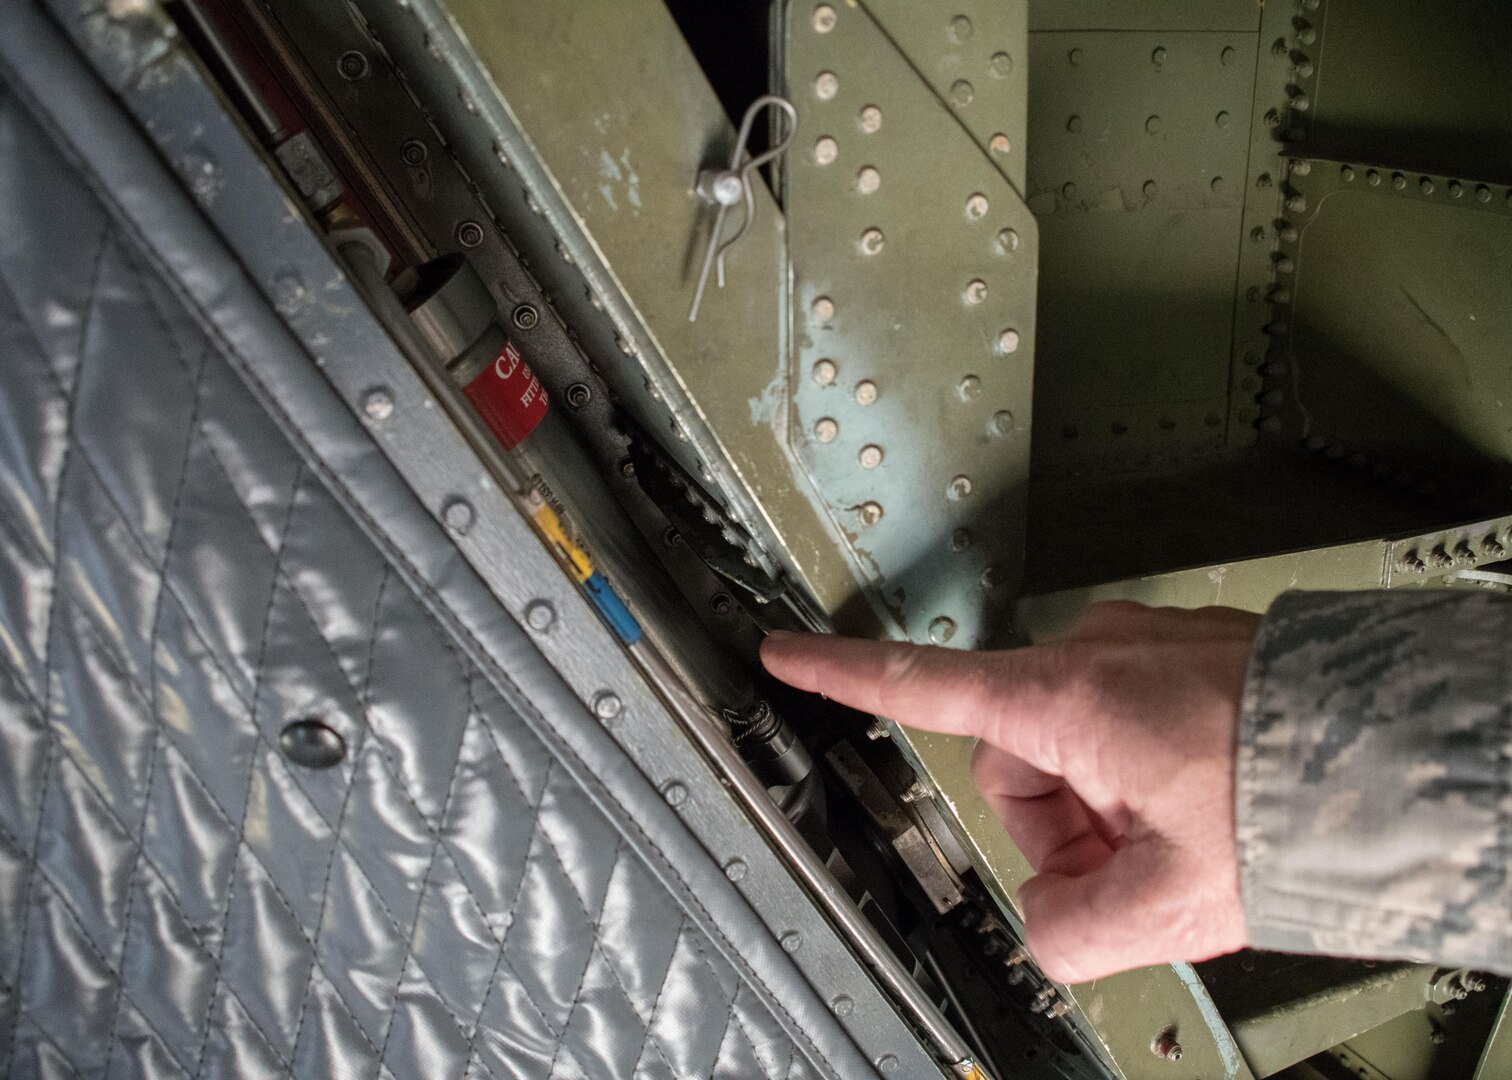 Master Sgt. D.J. Little, a 94th Maintenance Squadron hydraulic technician, points out the small space that houses the actuator on a C-5M Super Galaxy at Dobbins Air Reserve Base, Ga. Oct. 6, 2017. Little worked with technicians from Dover Air Force Base, Dela. on creating custom-sized hydraulic hoses to bypass the actuator so that it could be replaced. The actuator is needed to open and close the visor of the aircraft so that cargo can be offloaded. In this case, the cargo included communication equipment for Puerto Rico. (U.S. Air Force photo/Staff Sgt. Andrew Park)